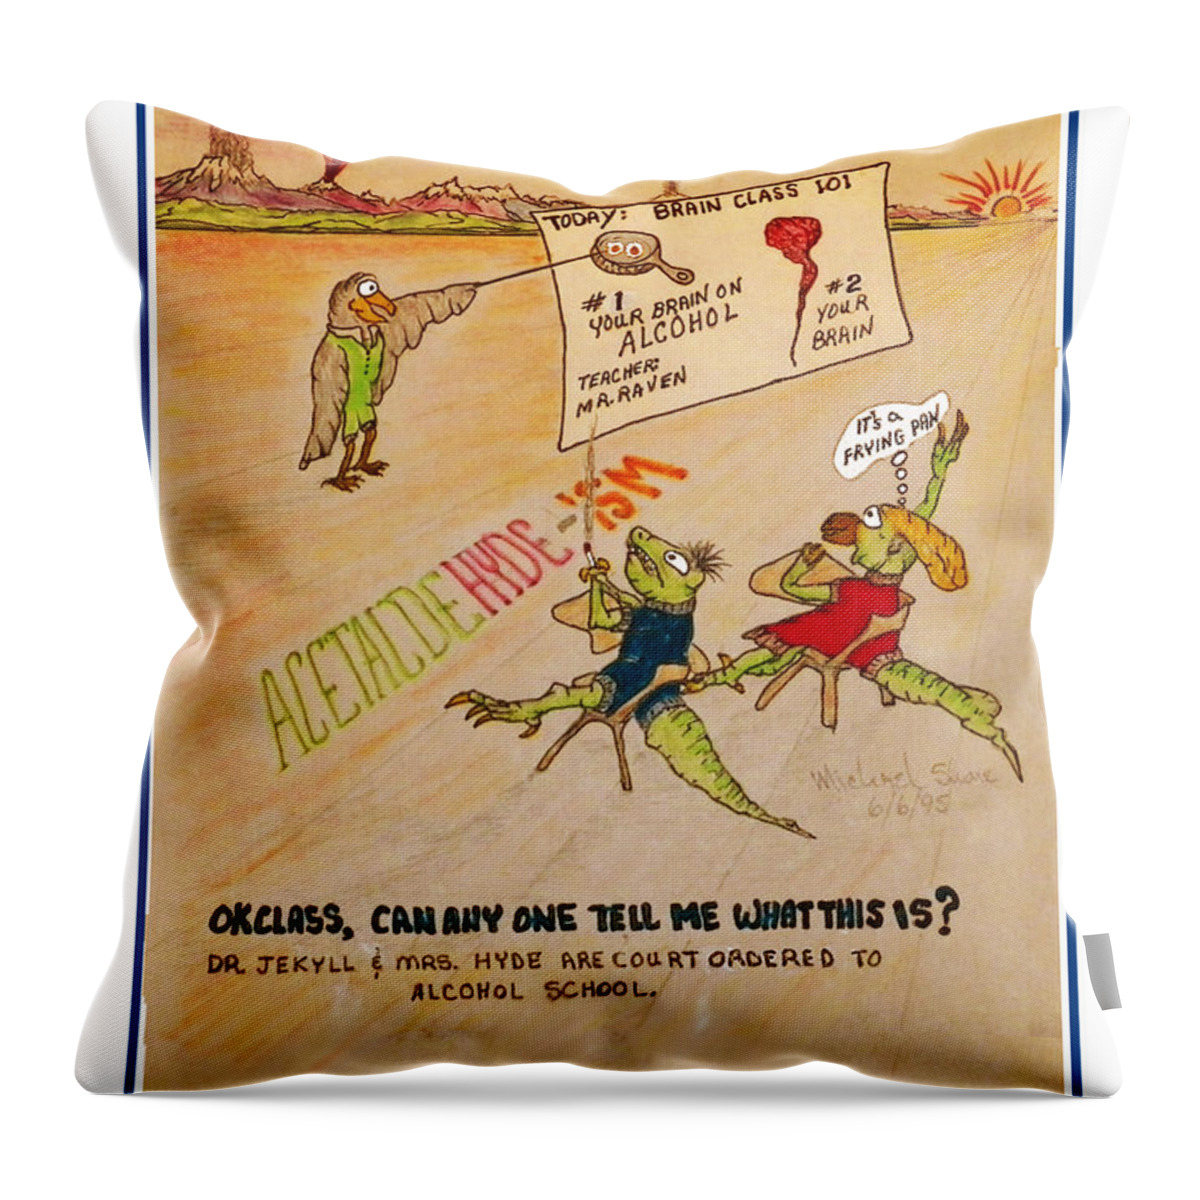 Alcohol Throw Pillow featuring the painting Carl and Mary Court Ordered Alcohol by Michael Shone SR